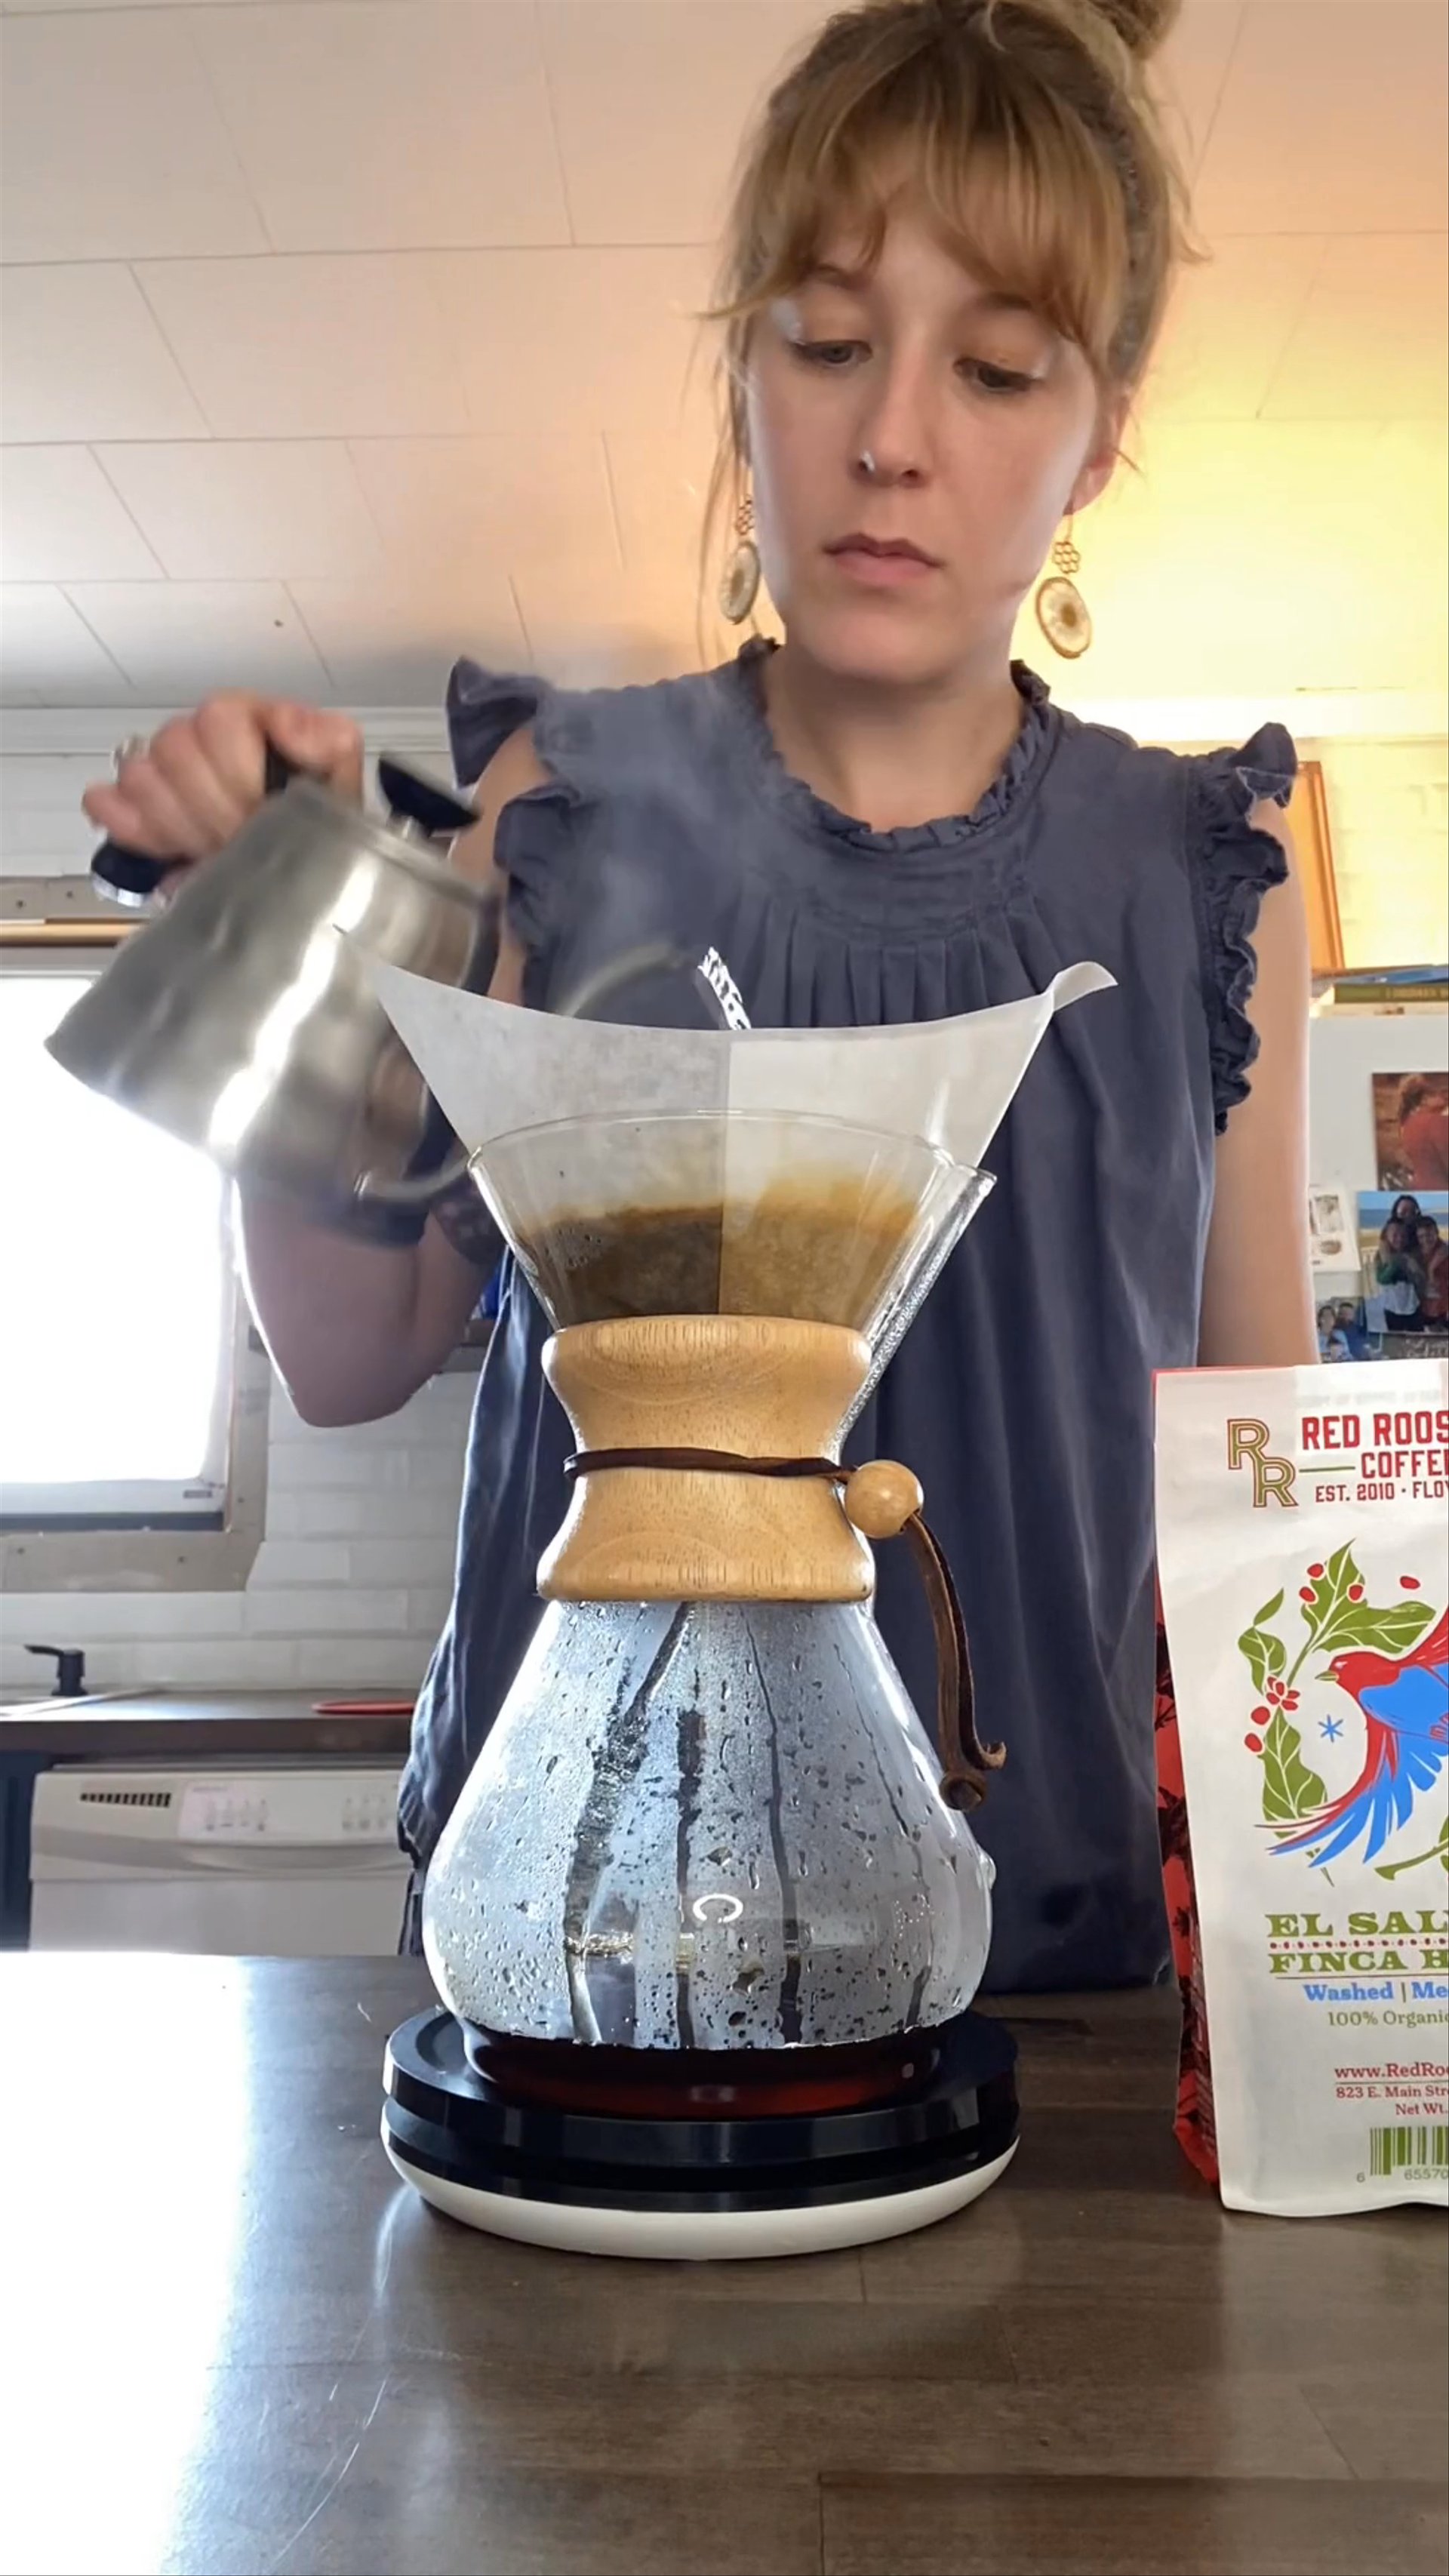 Chemex 6-Cup Brewer - Wood Band - Java Central